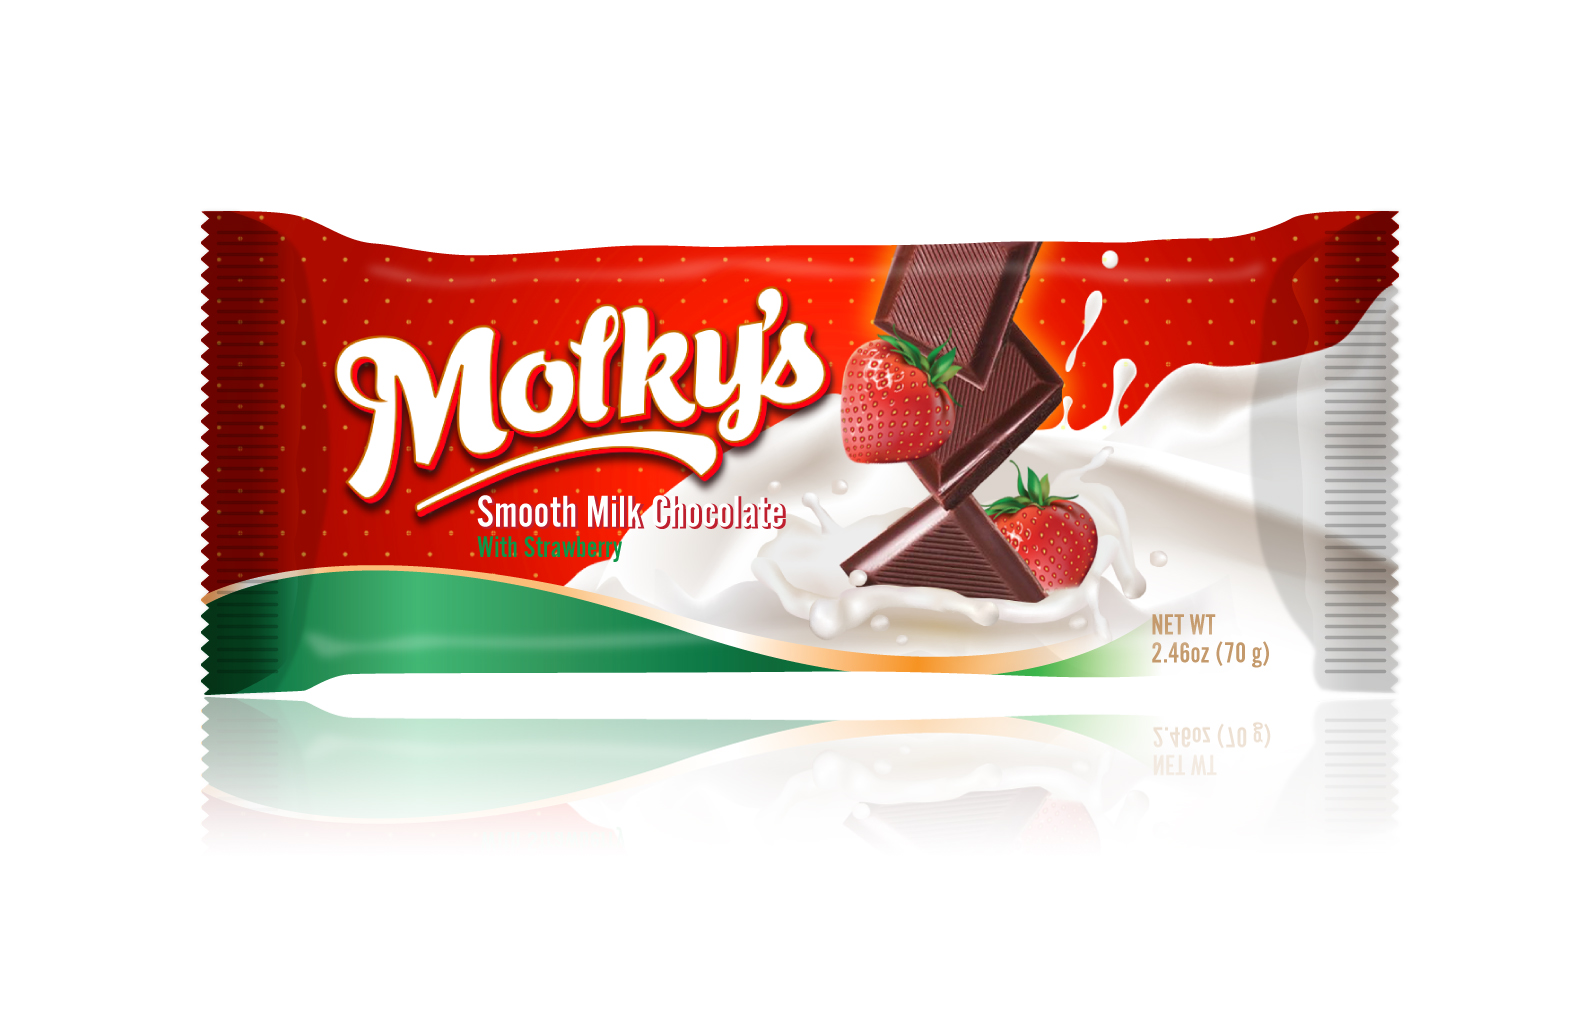 Product Branding and Packaging Design for Molky's Chocolate